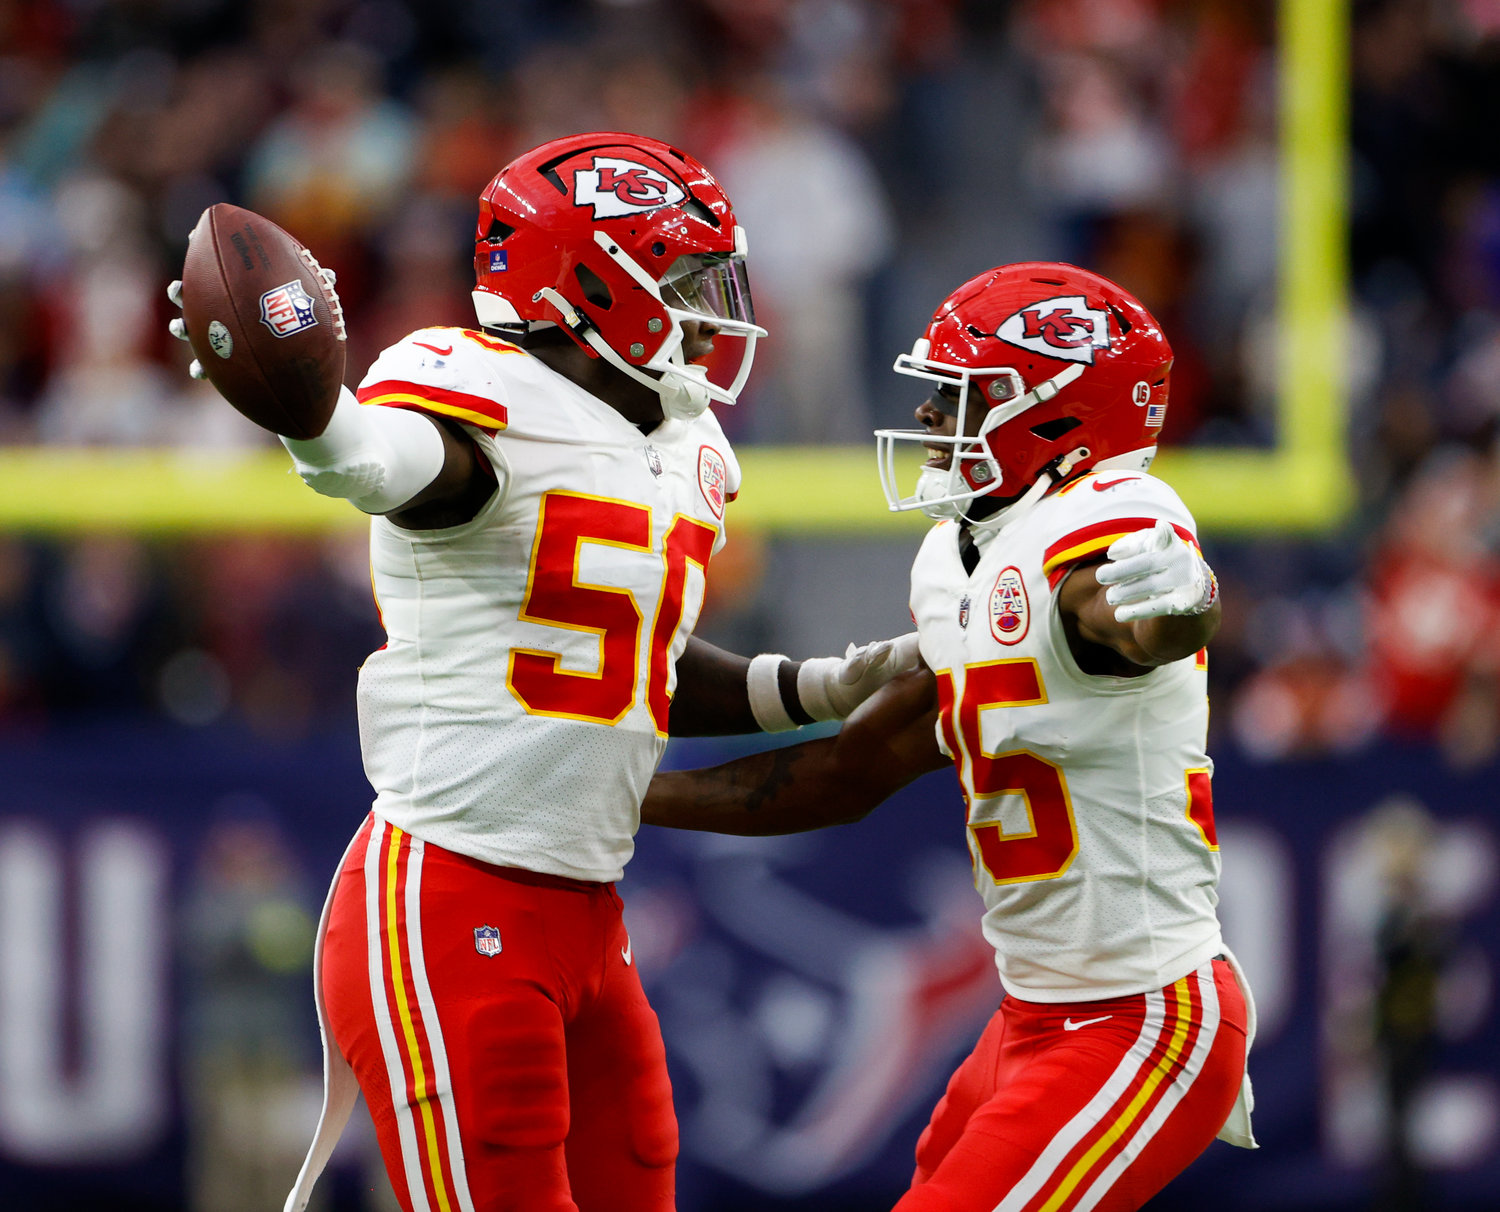 Kansas City Chiefs linebacker Willie Gay (50) celebrates with cornerback Jaylen Watson (35) after recovering a fumble to set up a game-winning score in overtime during an NFL game between the Texans and the Chiefs on Dec. 18, 2022, in Houston. The Chiefs won, 30-24 in overtime.